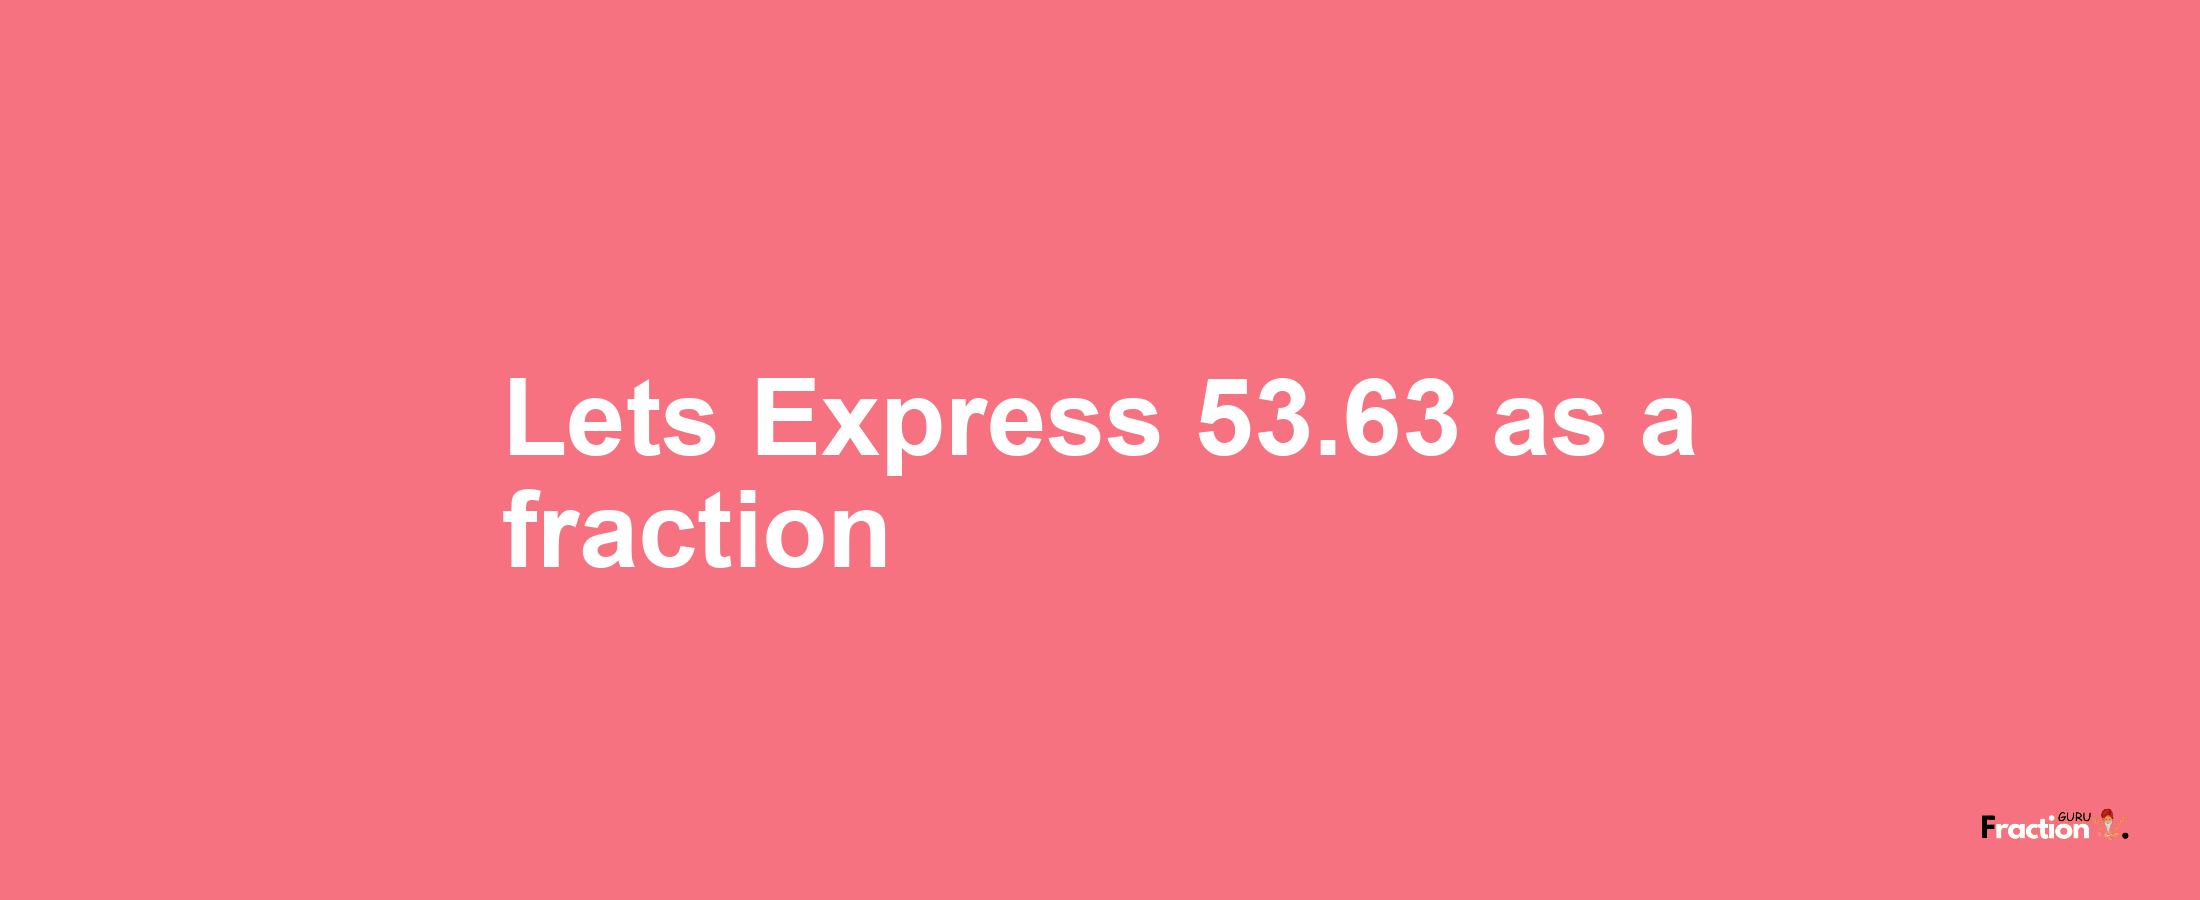 Lets Express 53.63 as afraction